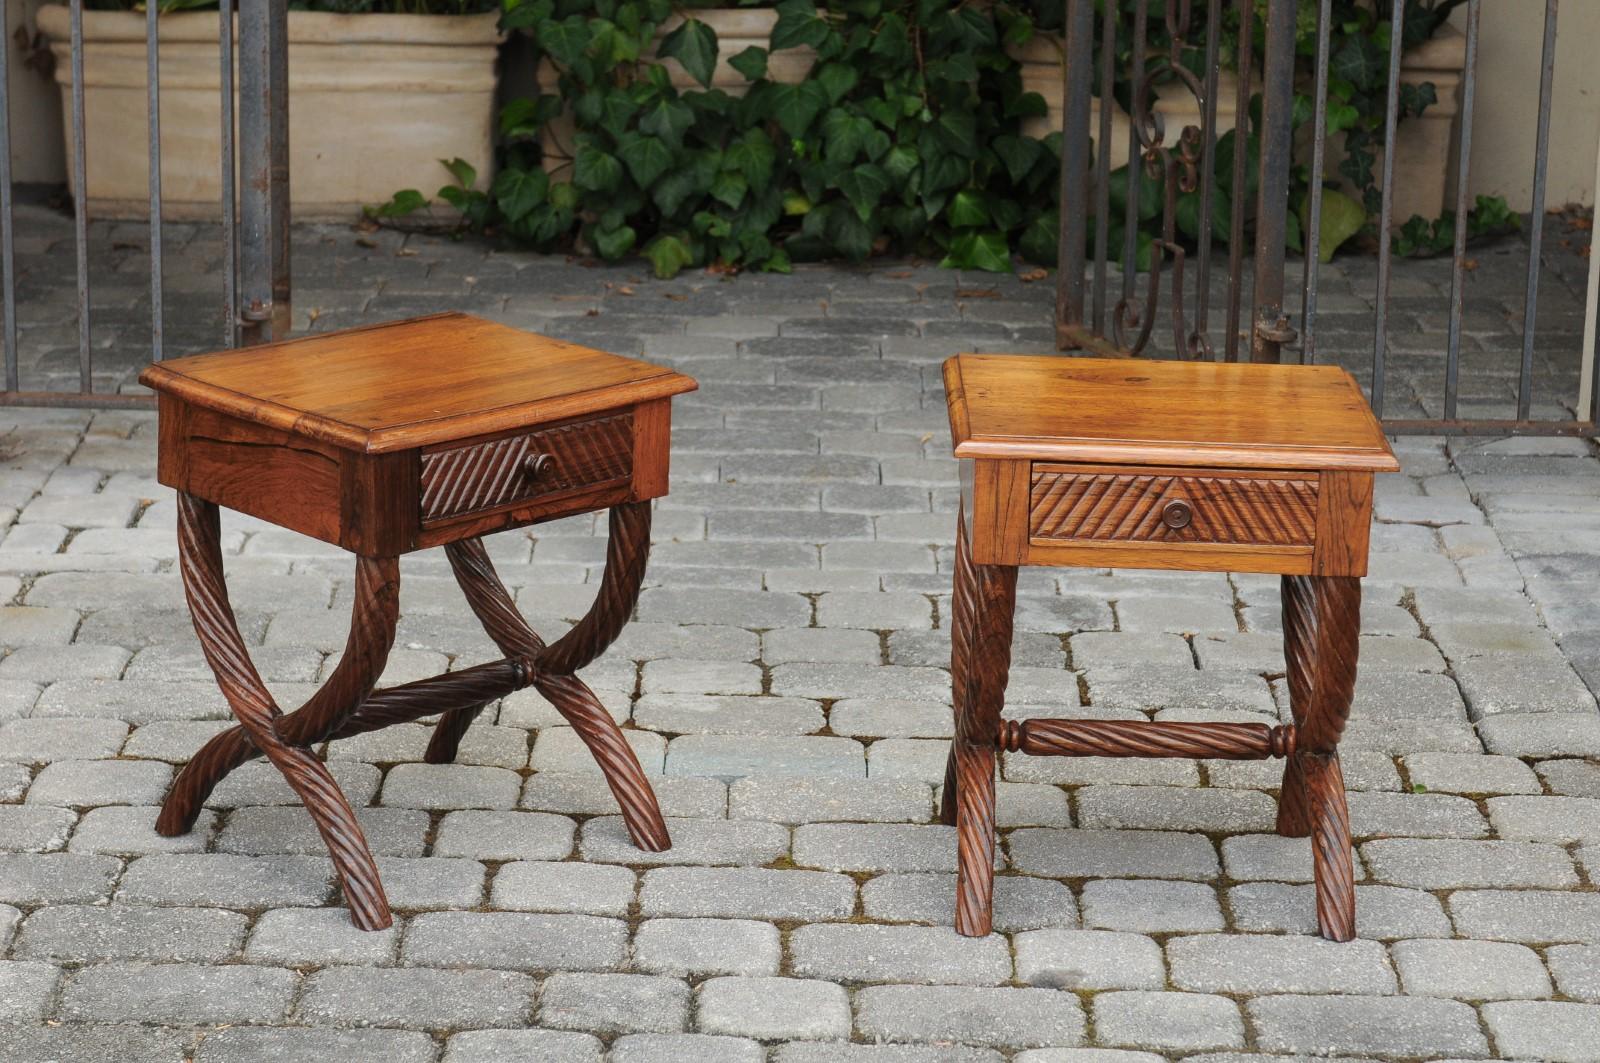 A pair of Anglo-Indian low side tables from the early 20th century, with Curule bases and twisted accents. Born in the early 1900s, each of this pair of Anglo-Indian low tables features a rectangular top sitting above an apron presenting a single